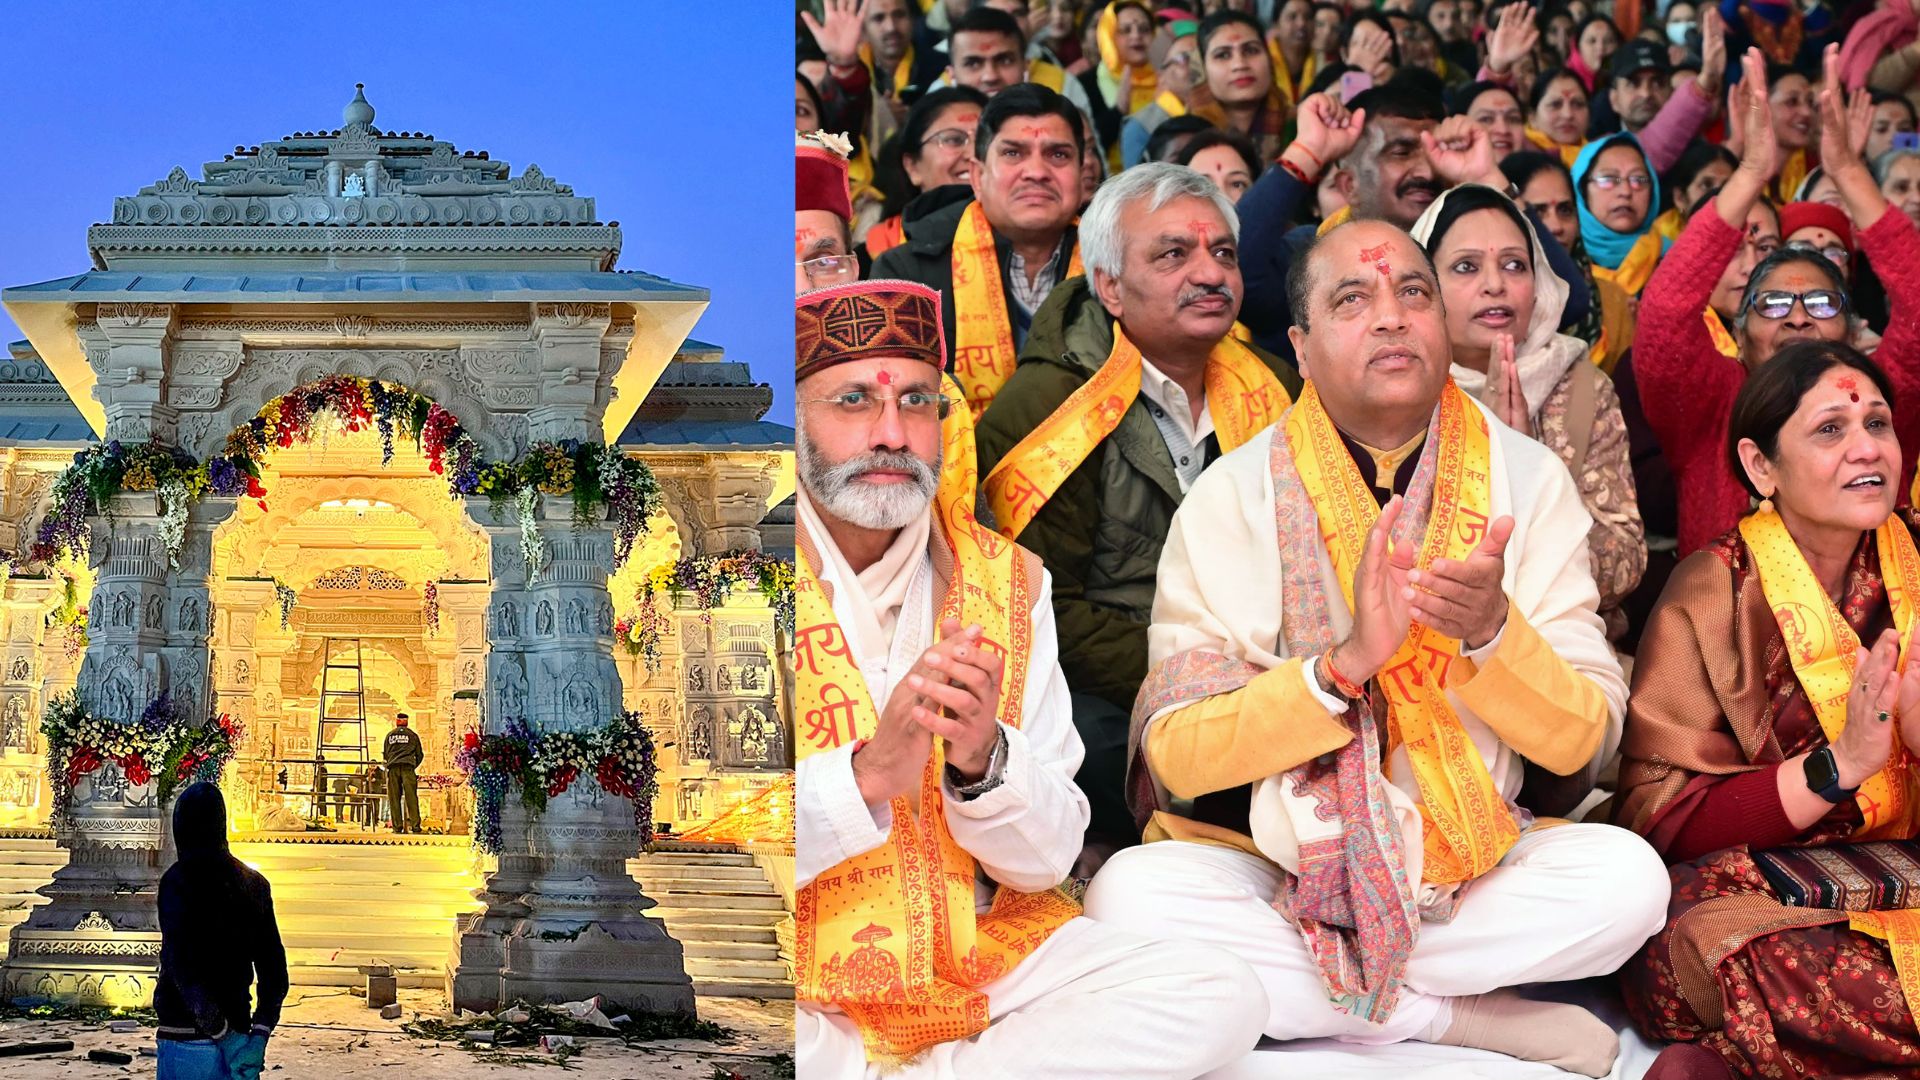 Thousands of Devotees Flock to Ayodhya’s Ram Temple Following PM’s Consecration Rituals